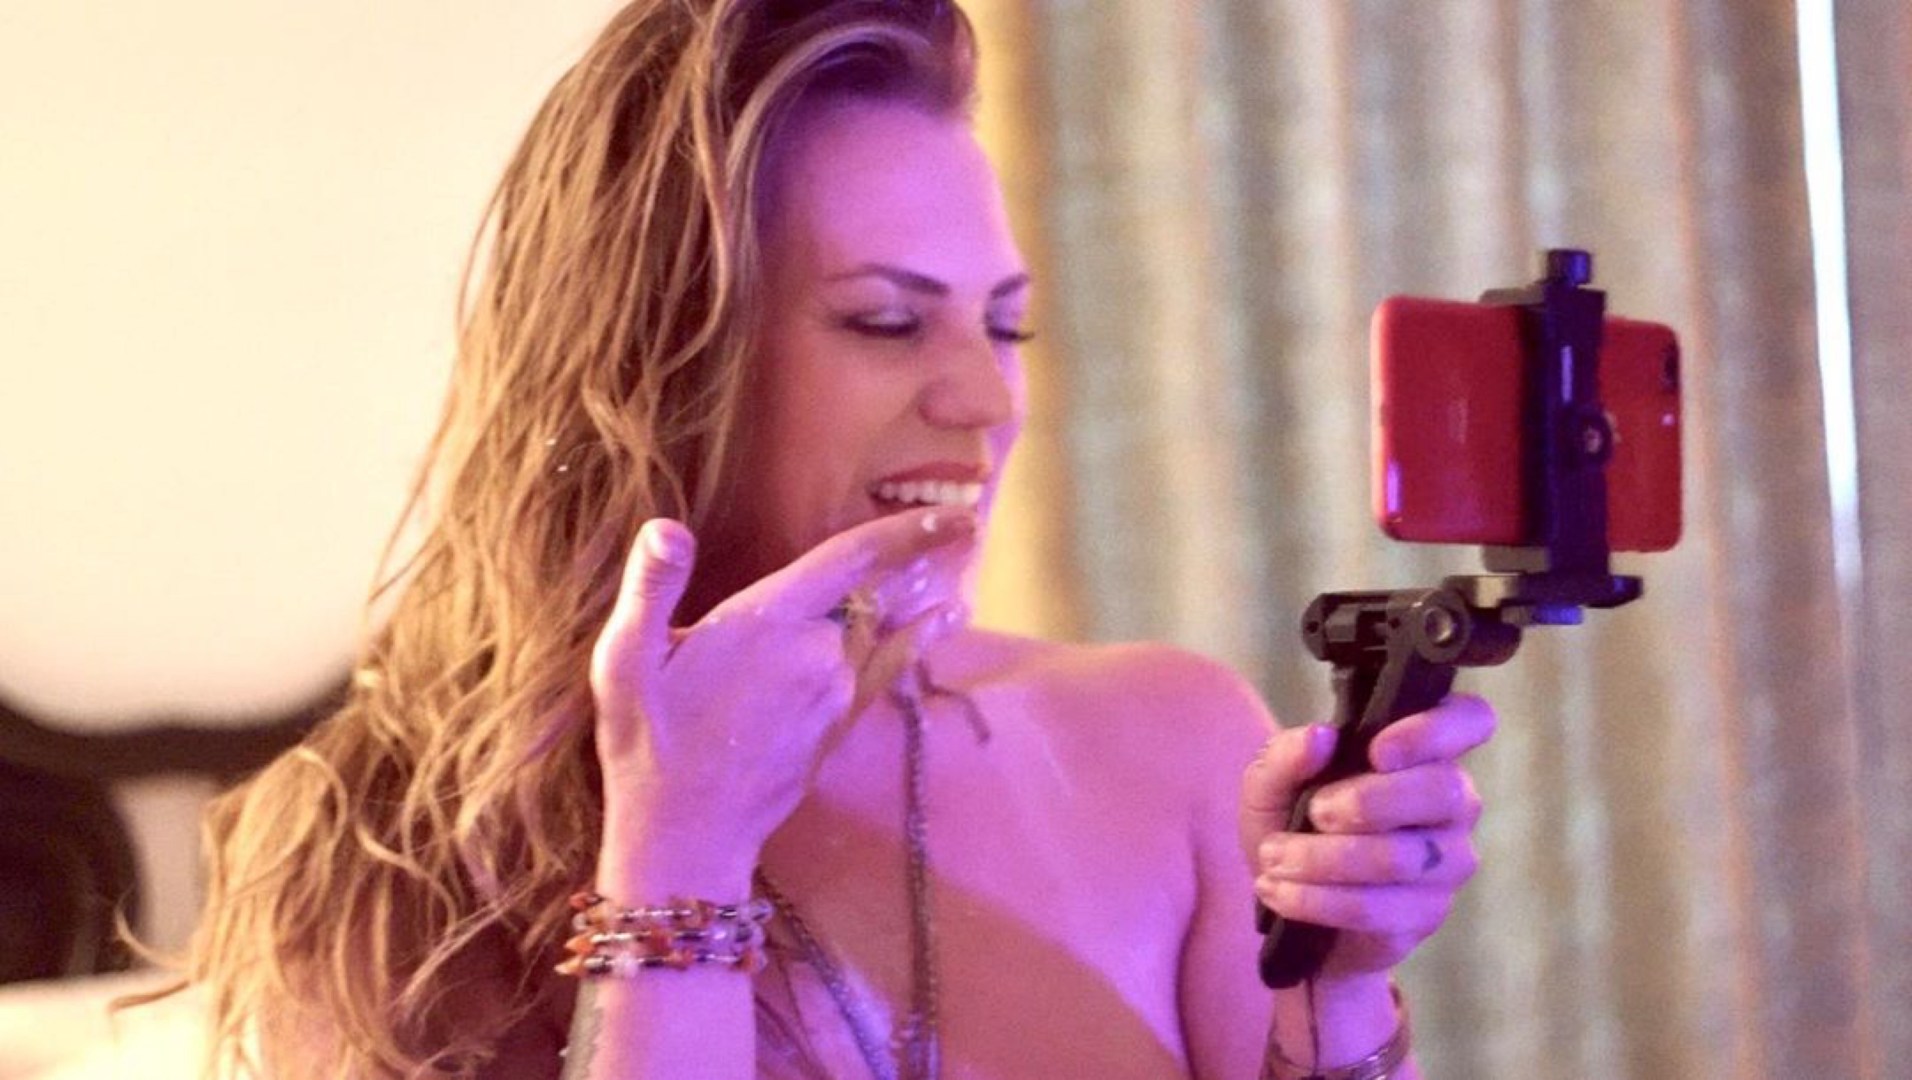 A strawberry blond woman holds a finger to her mouth and smiles for the camera on her phone she is holding with a tripod